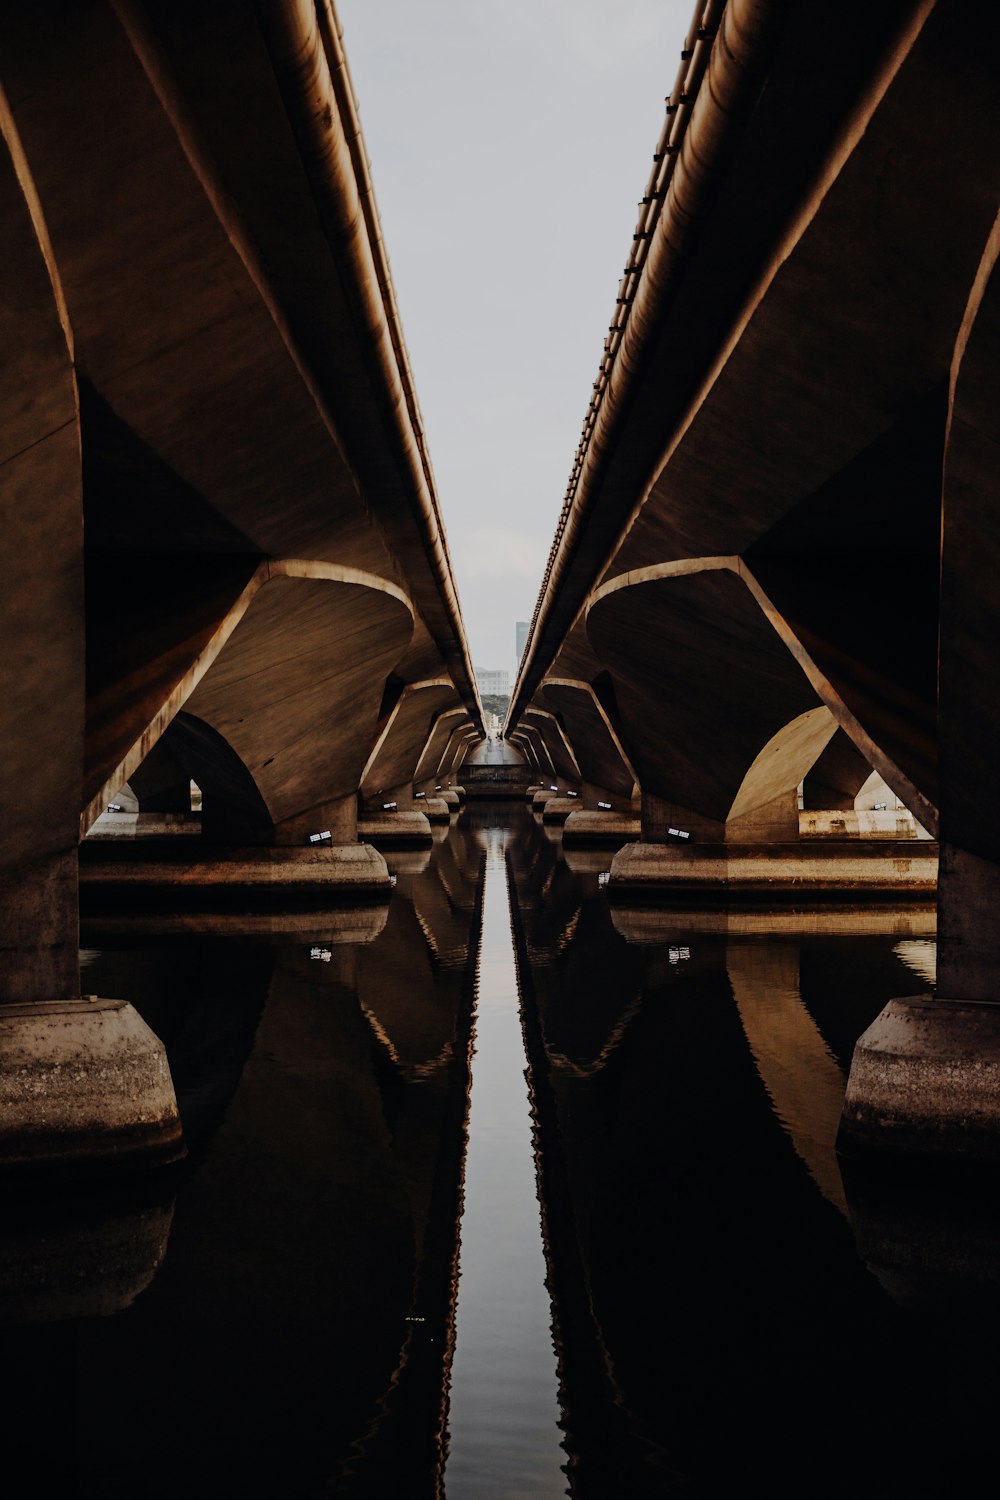 a view of the underside of a bridge over water